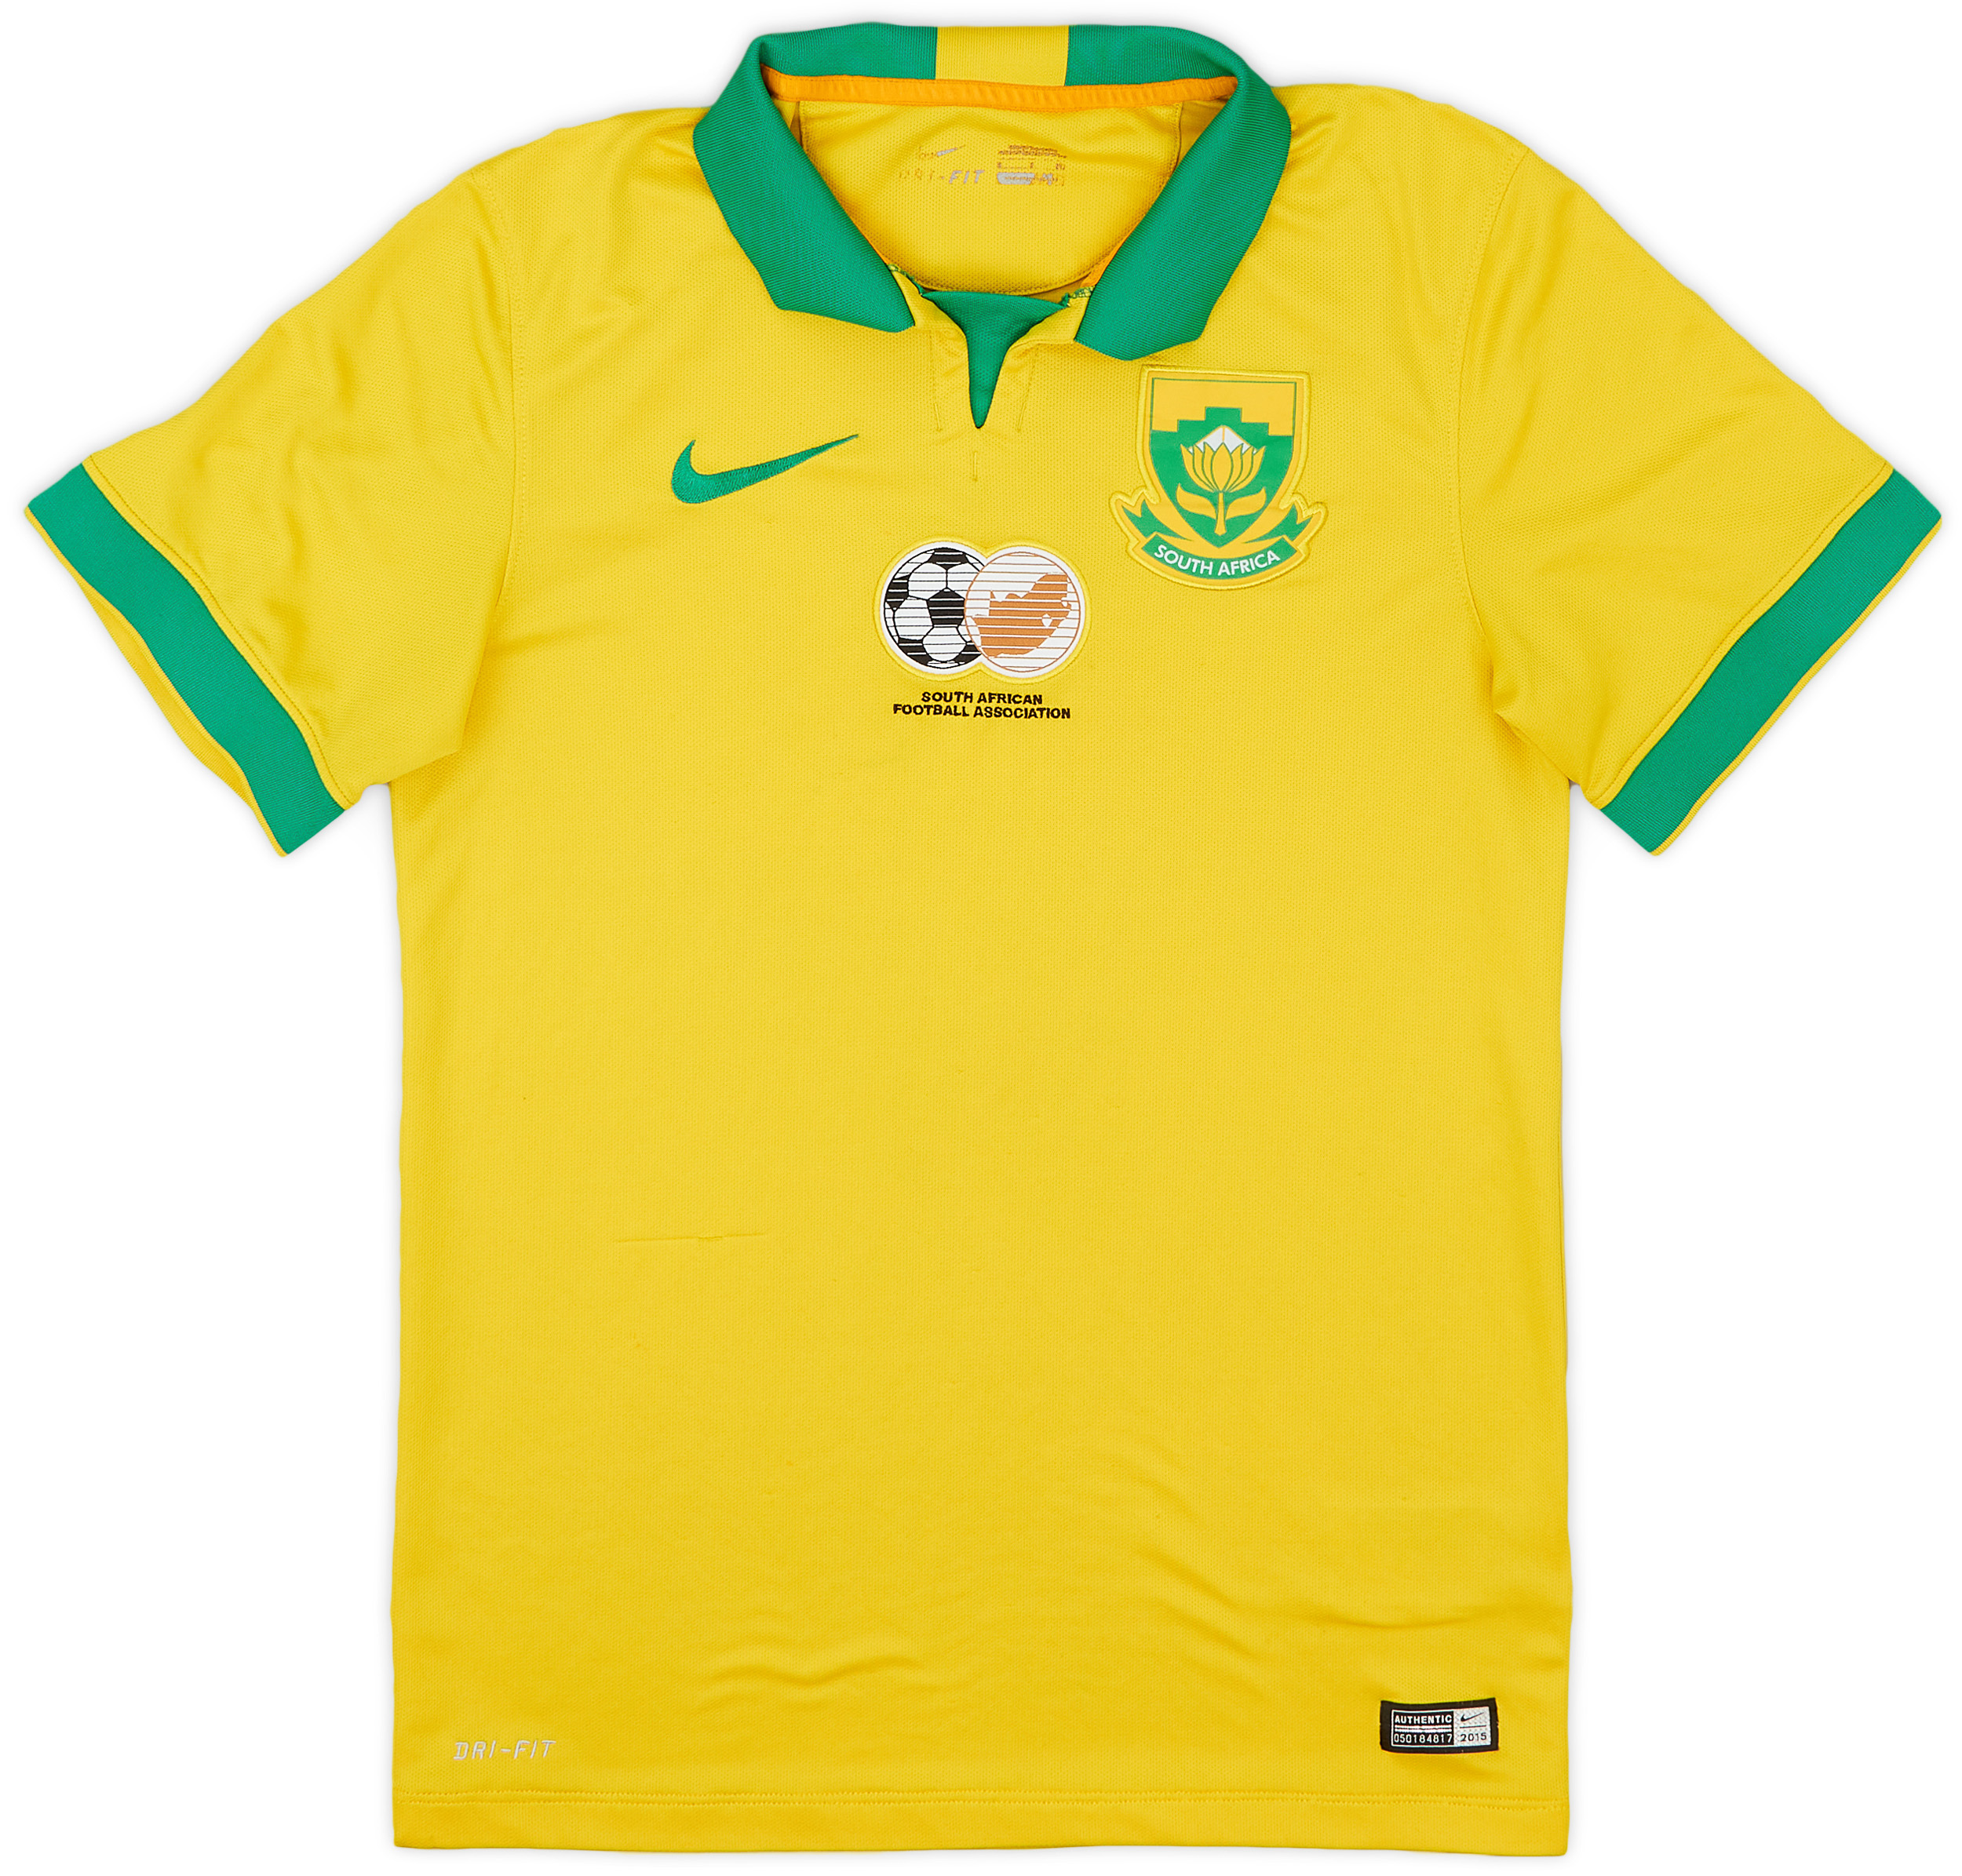 2015-16 South Africa Home Shirt - 5/10 - ()